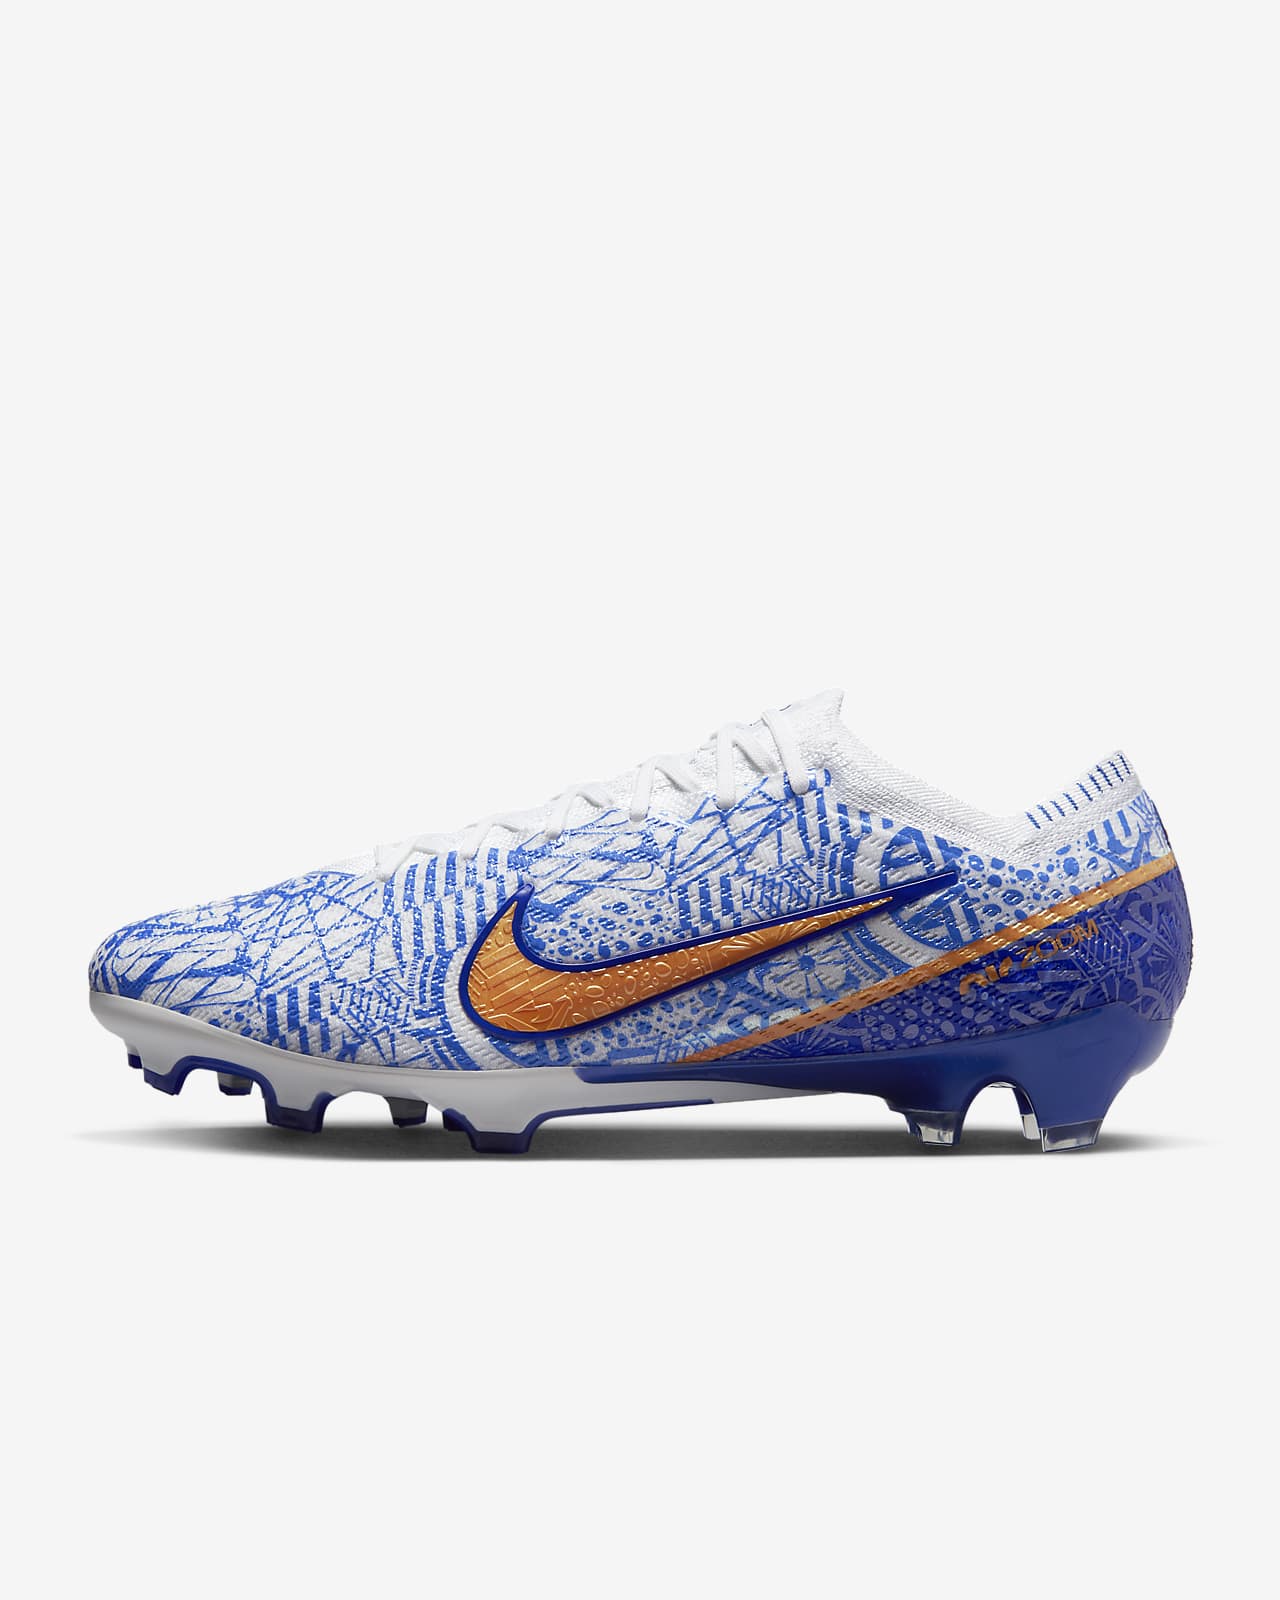 Almost Turns into Or either Nike Zoom Mercurial Vapor 15 Elite CR7 FG Firm-Ground Football Boots. Nike  LU